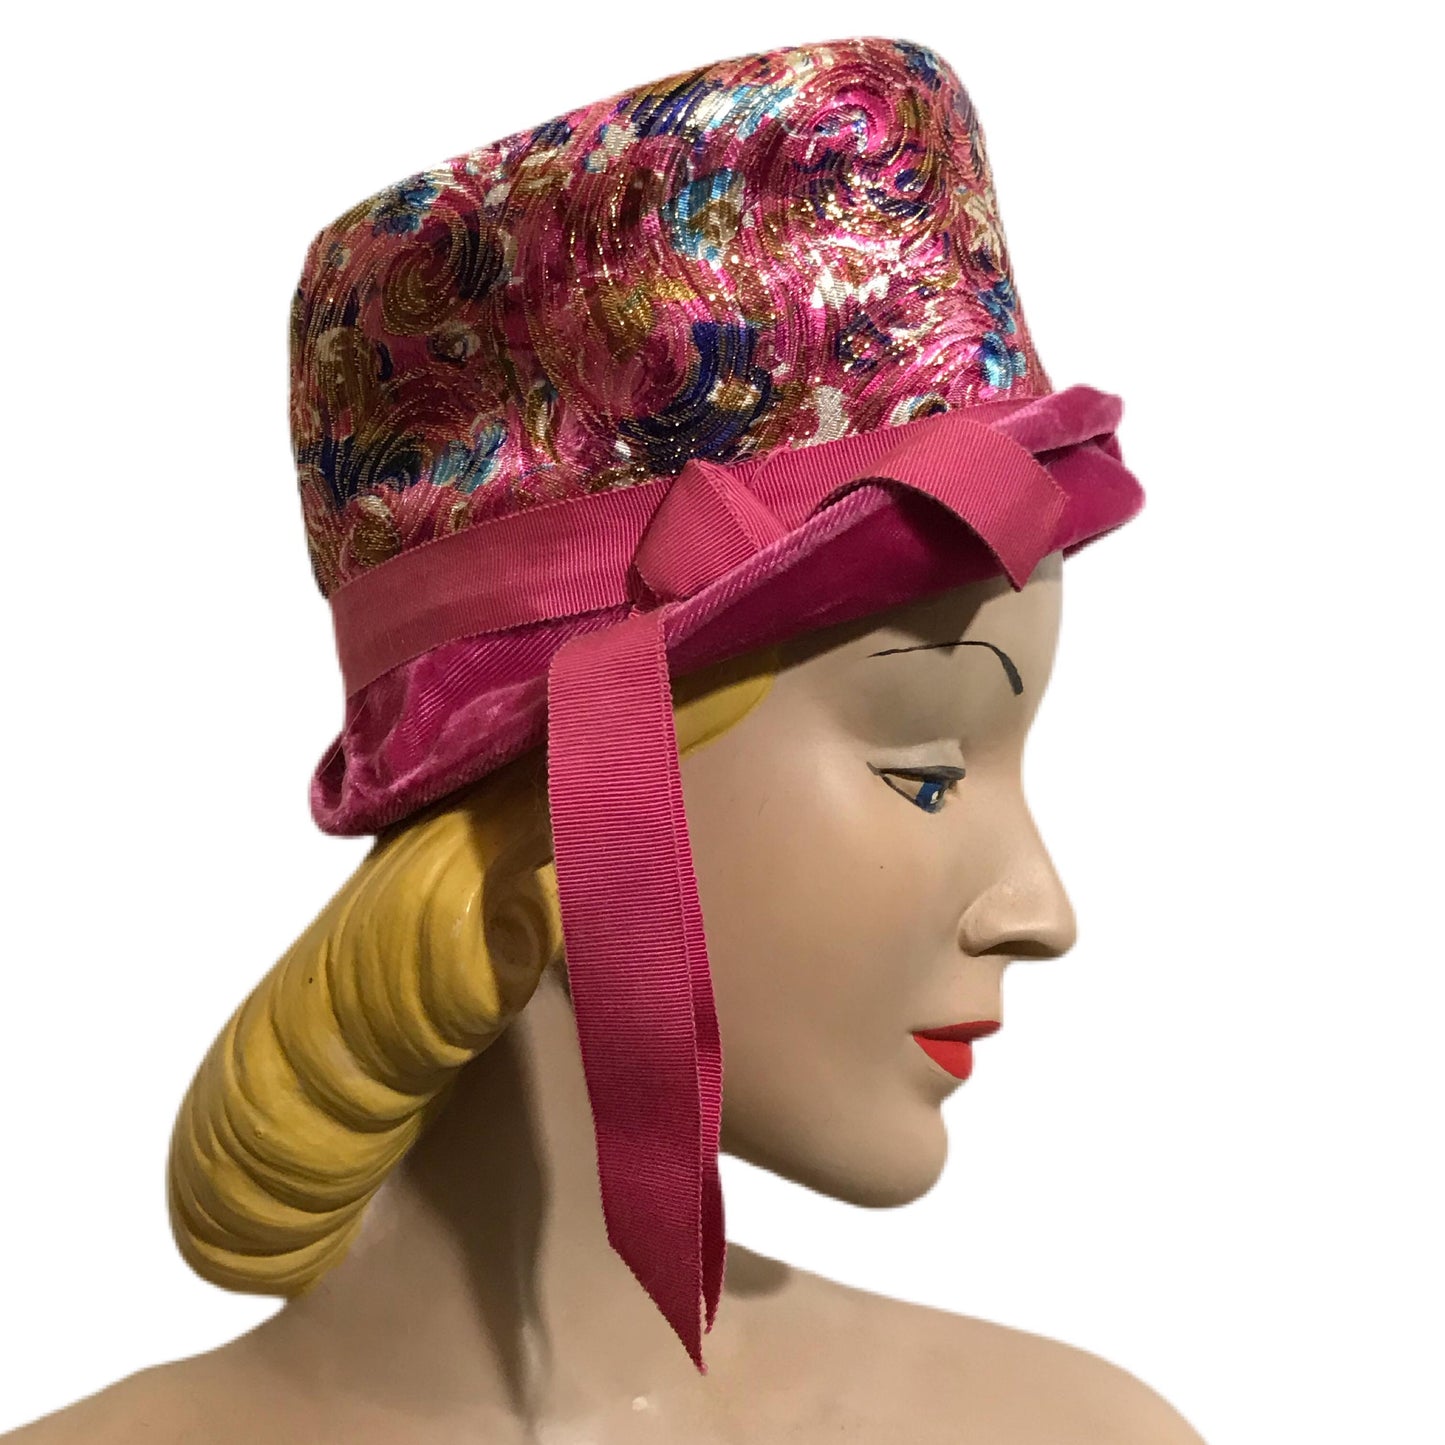 Metallic Pink and Gold Small Brim Hat with Bow circa 1960s